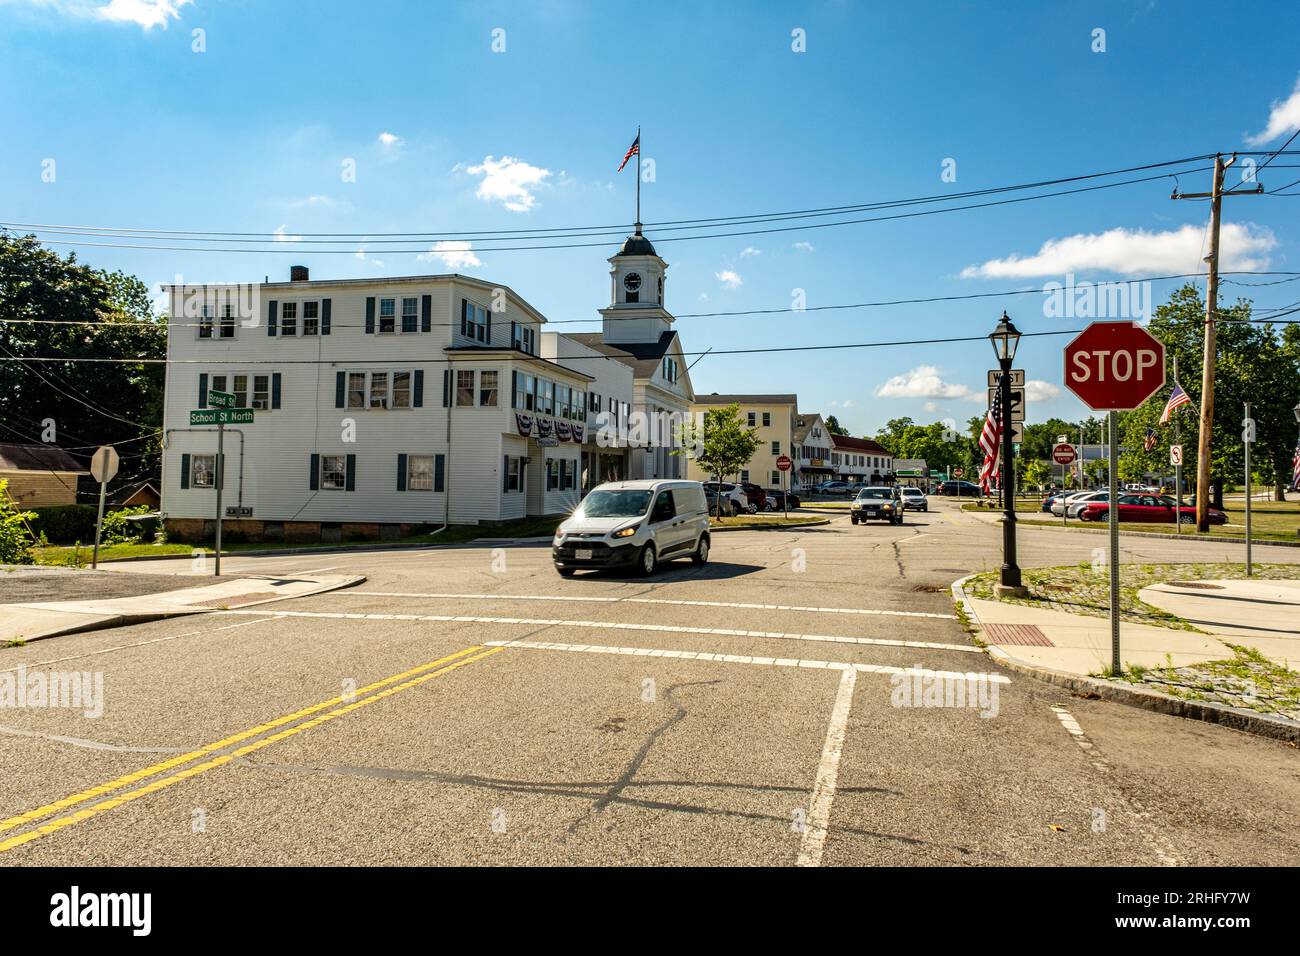 Main Street in a small rural town - Barre, MA Stock Photo